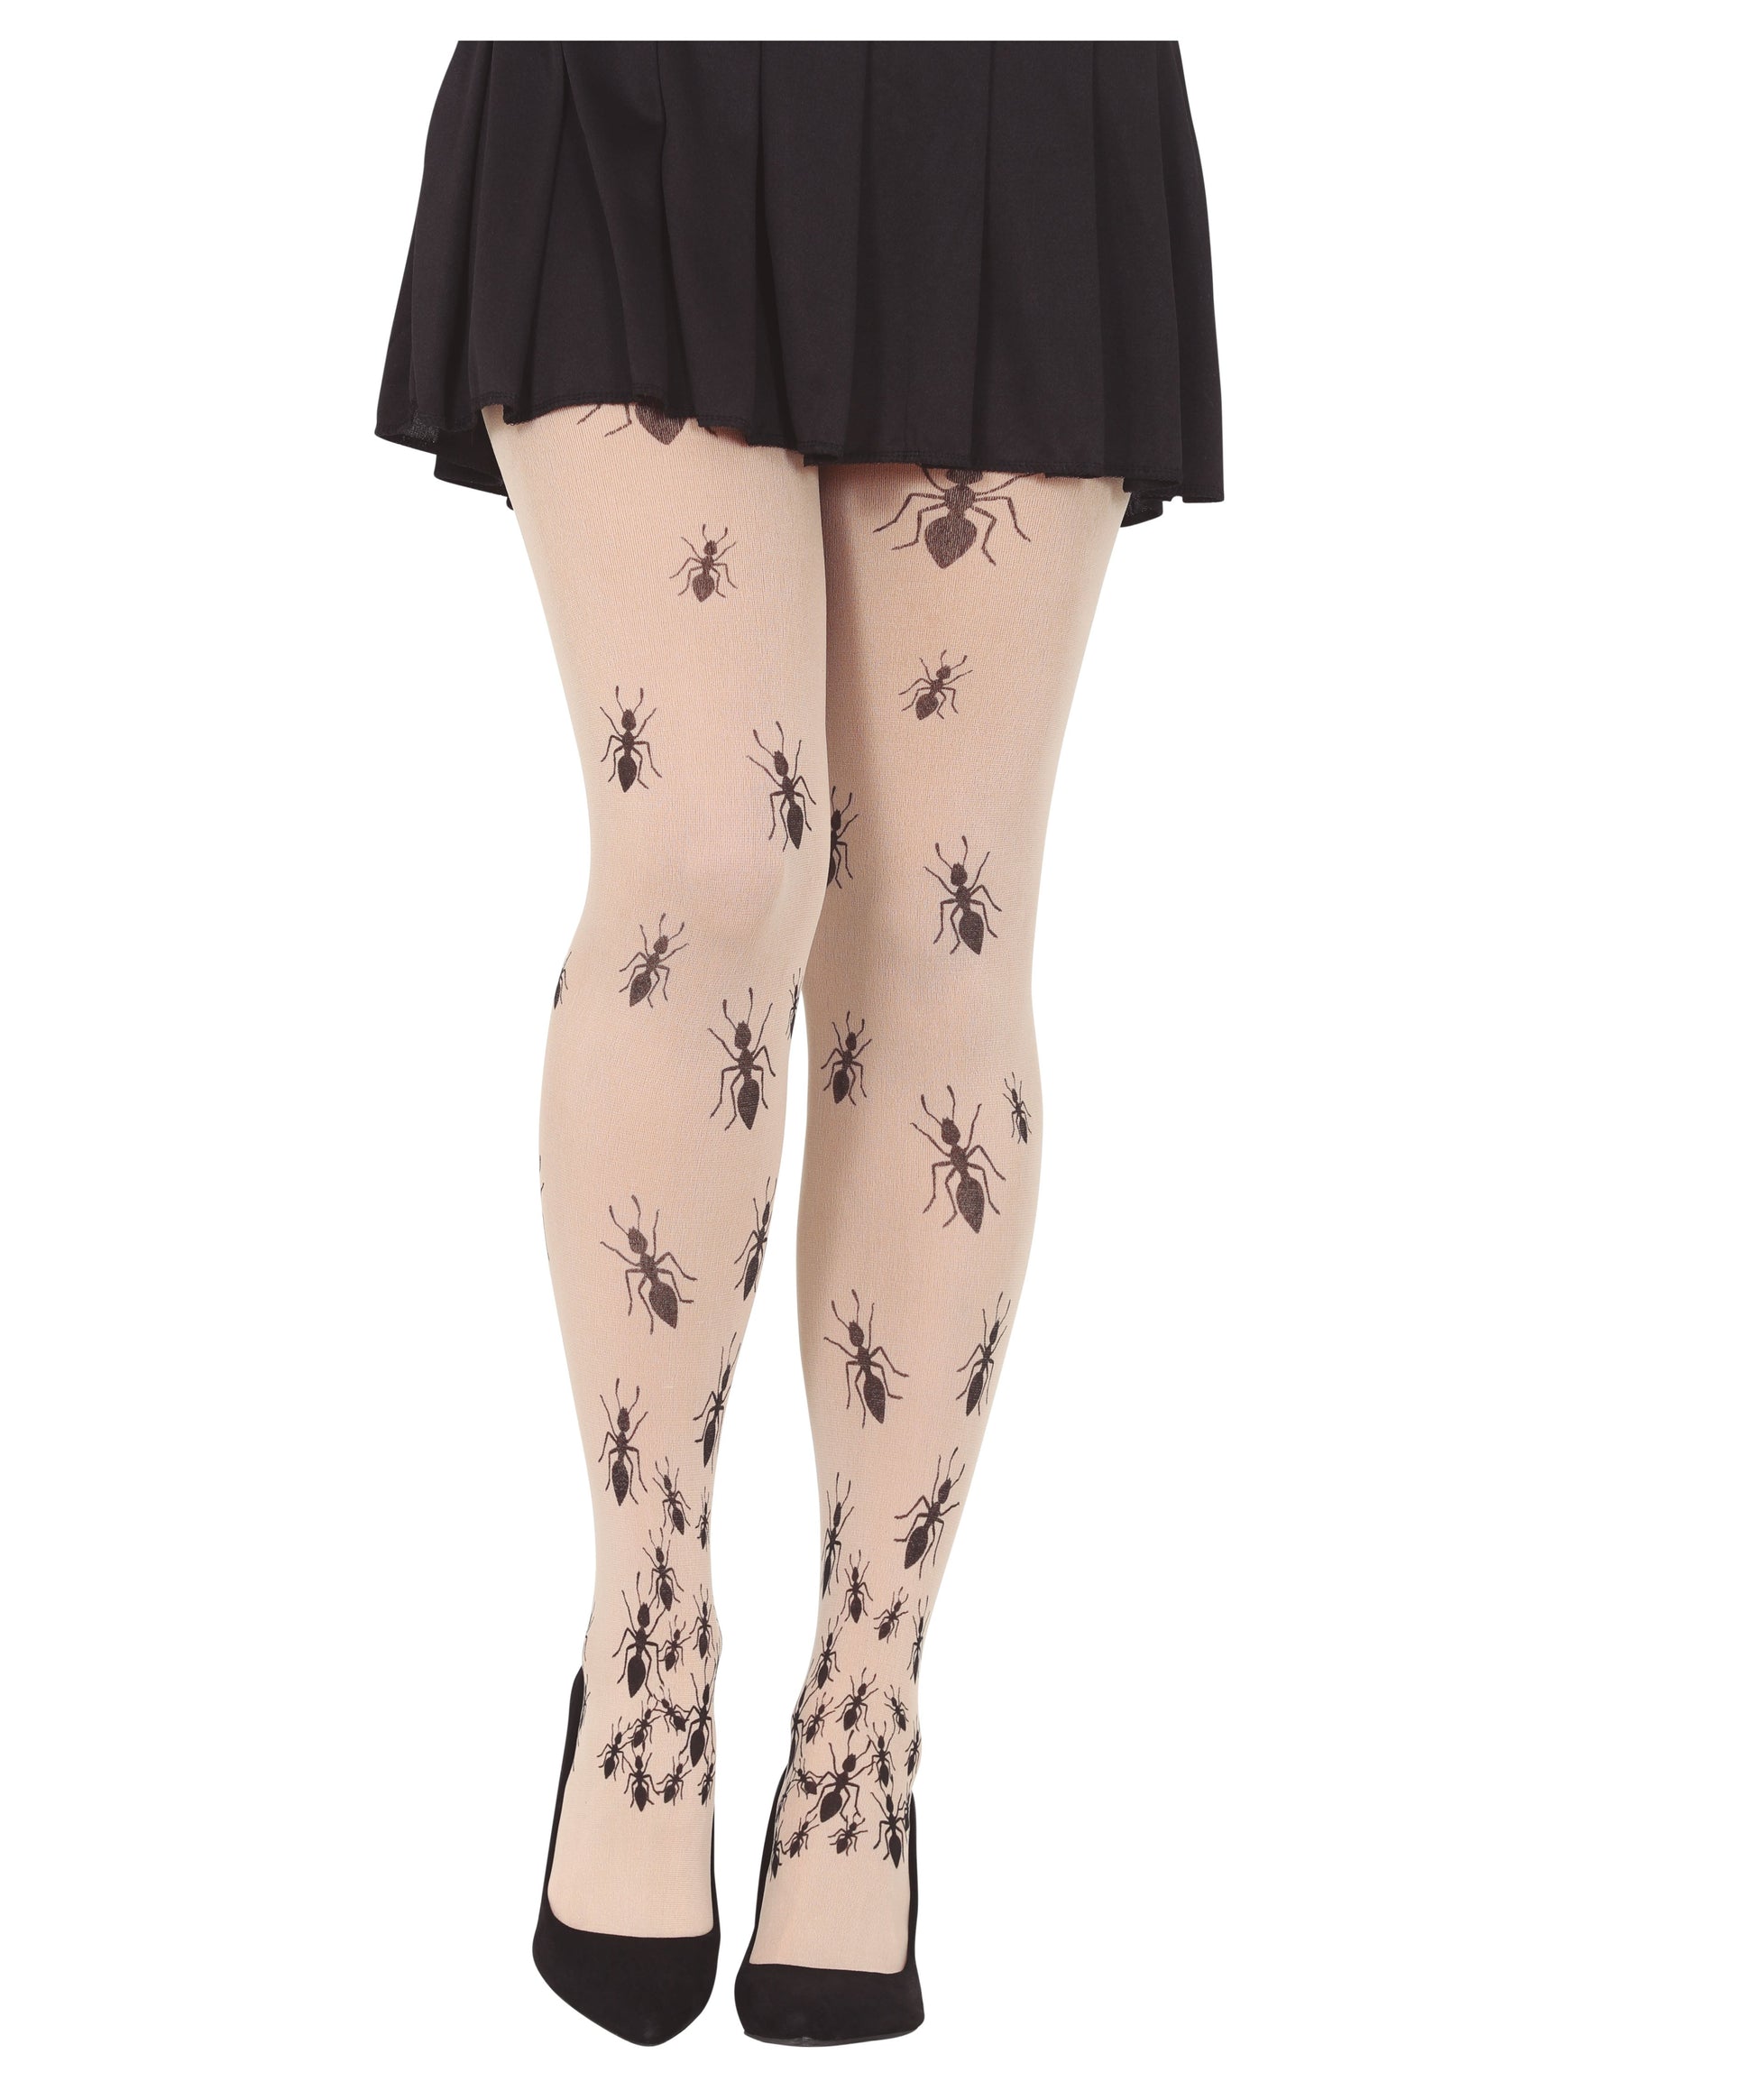 Crawling Ants Tights. Sheer with a crawling ant pattern.